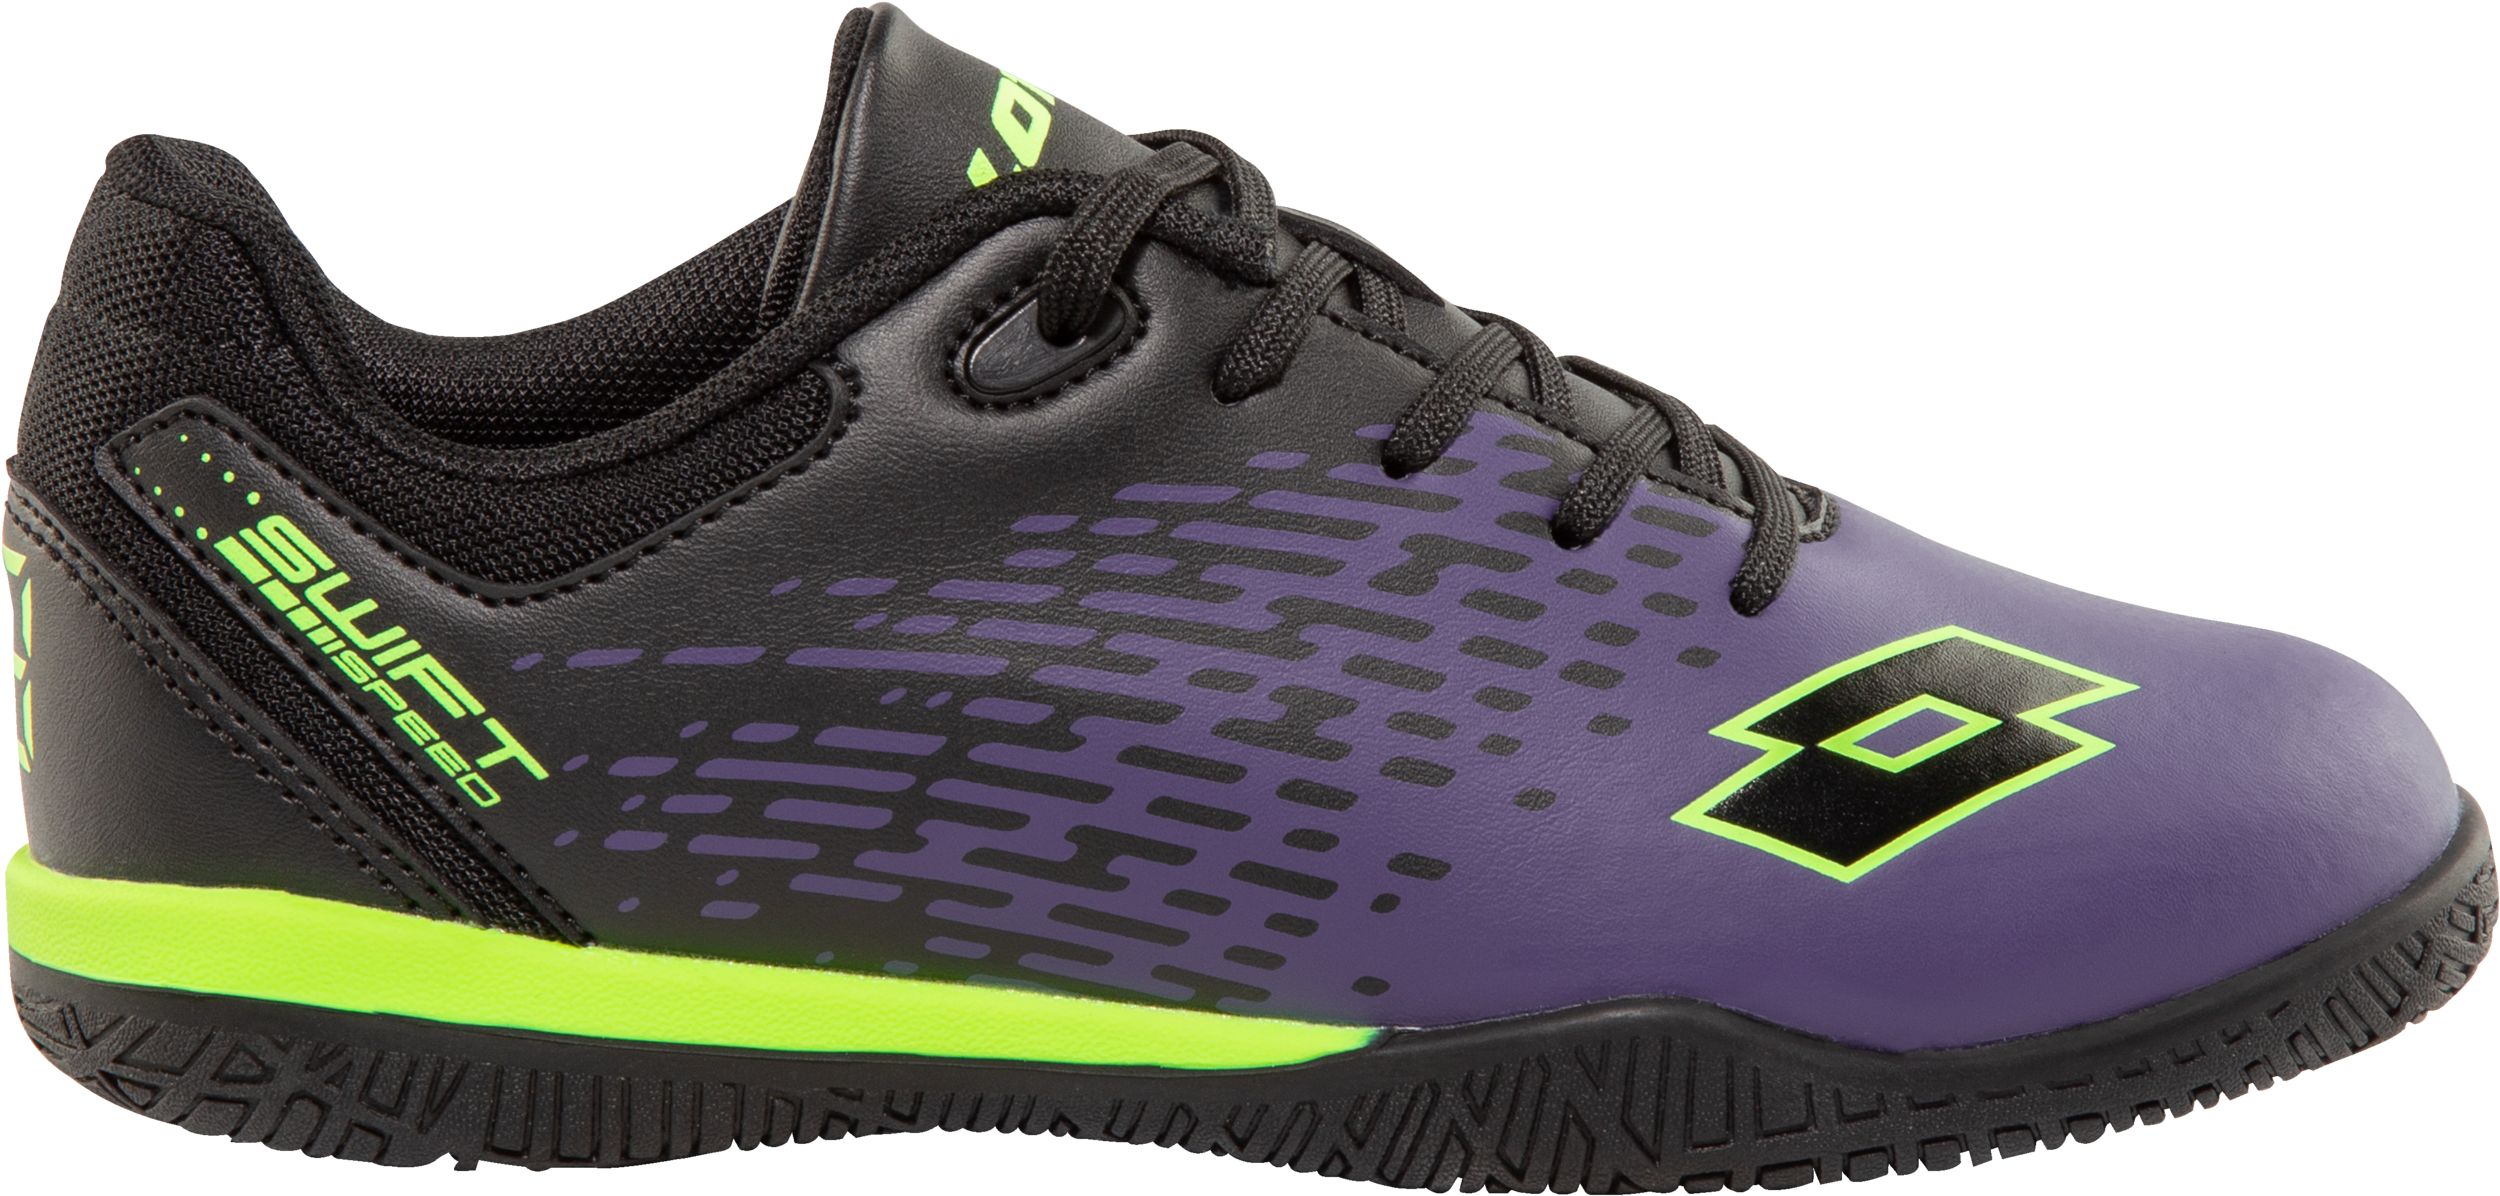 Lotto Kids' Speed Indoor Soccer Shoes  Boys'/Girls'